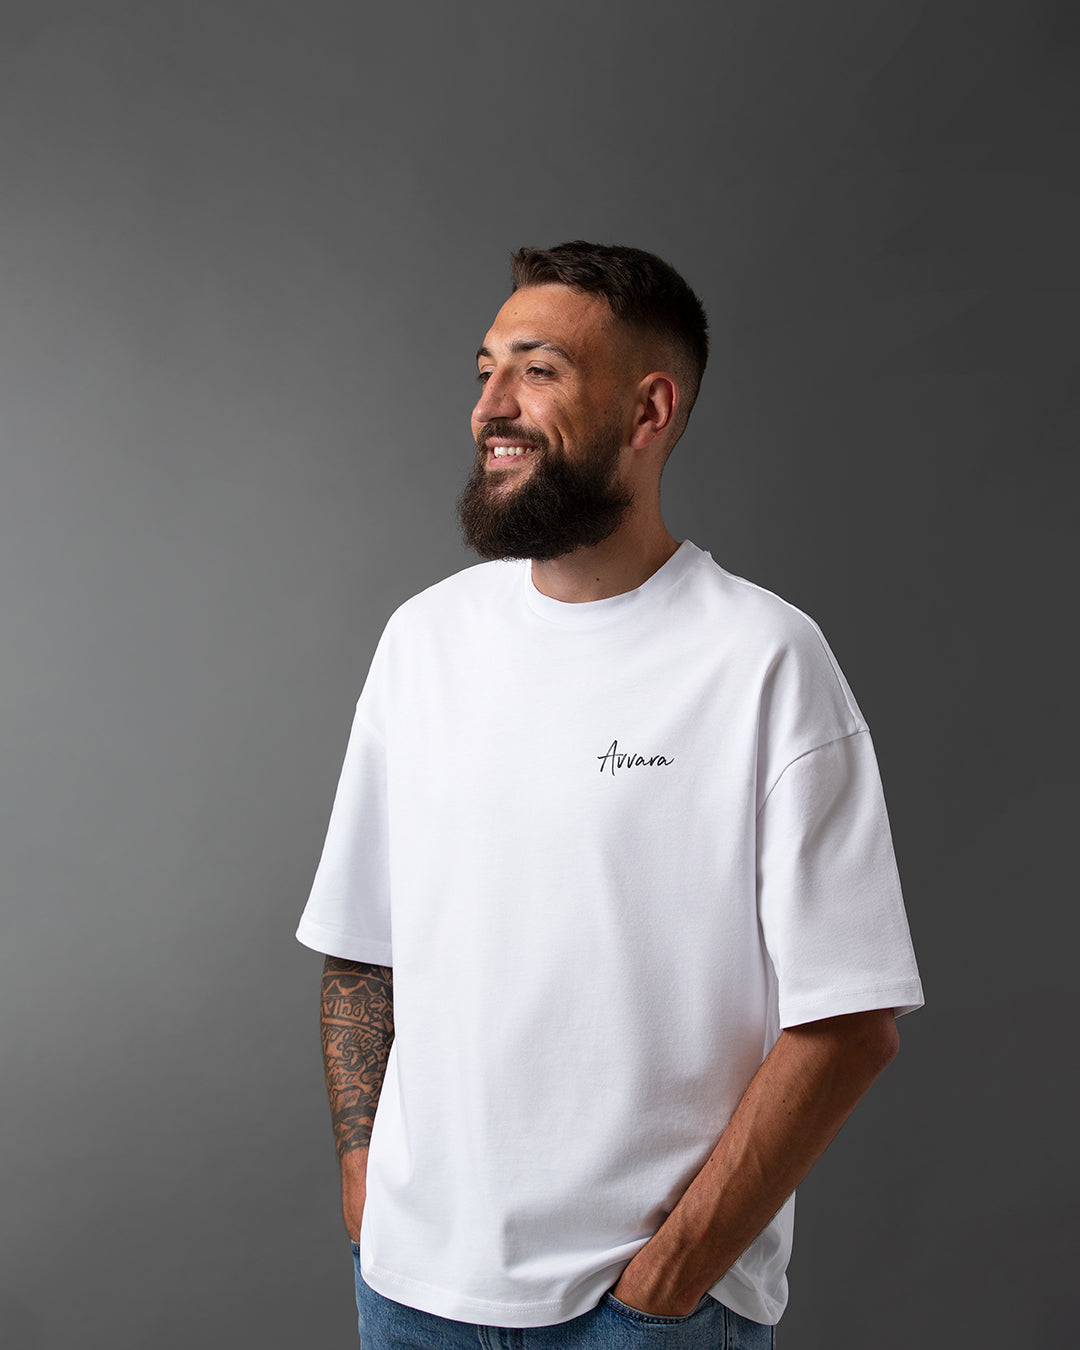 Born To Ride Oversized Fit T-Shirt